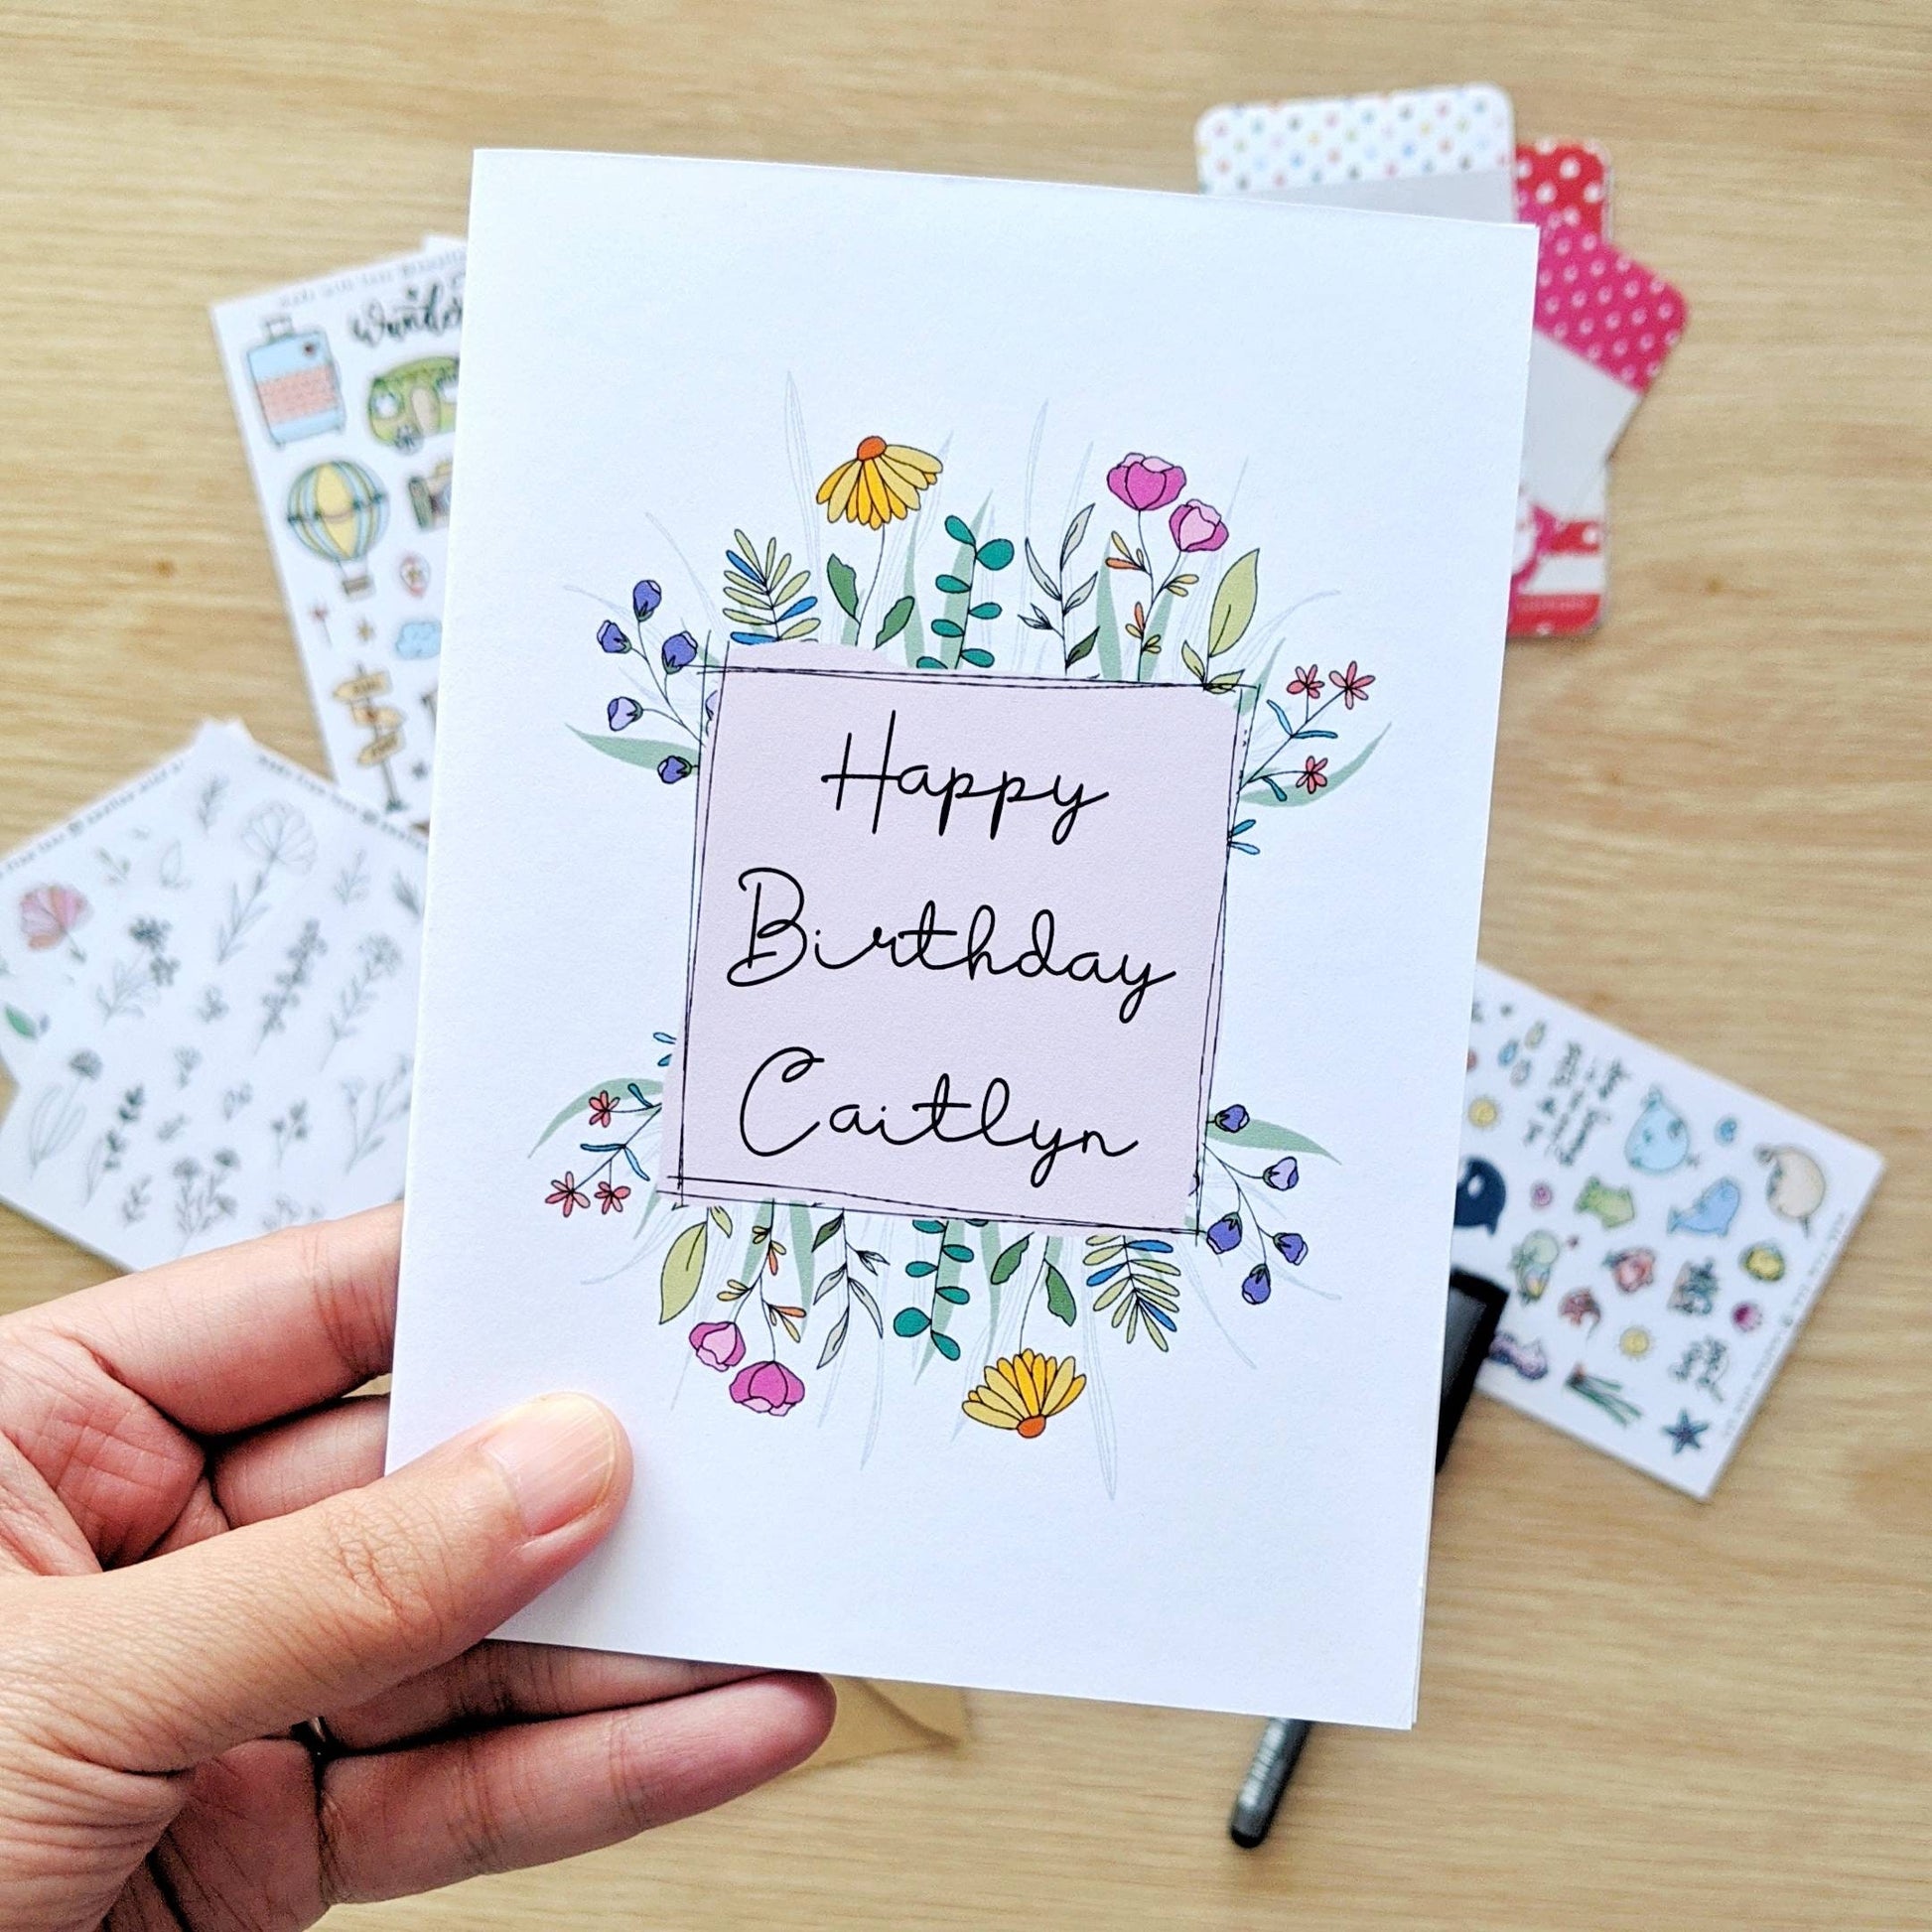 Greeting card held by the hand with illustration of a  with pink square surrounded by colourful flowers. Middle of square has the words "Happy Birthday Caitlyn"